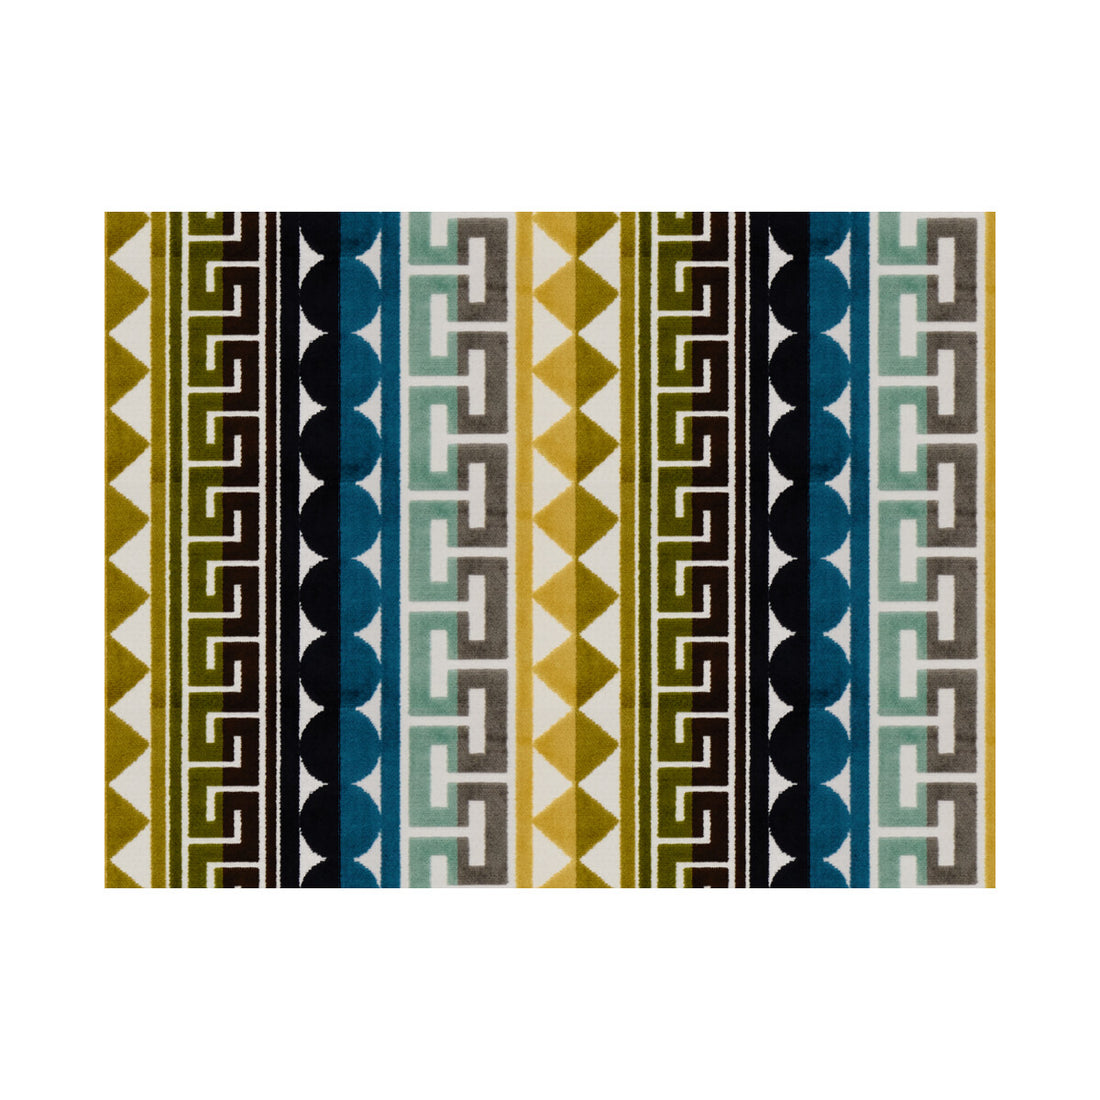 Seurat fabric in seaside color - pattern 33782.540.0 - by Kravet Design in the Jonathan Adler Charade collection